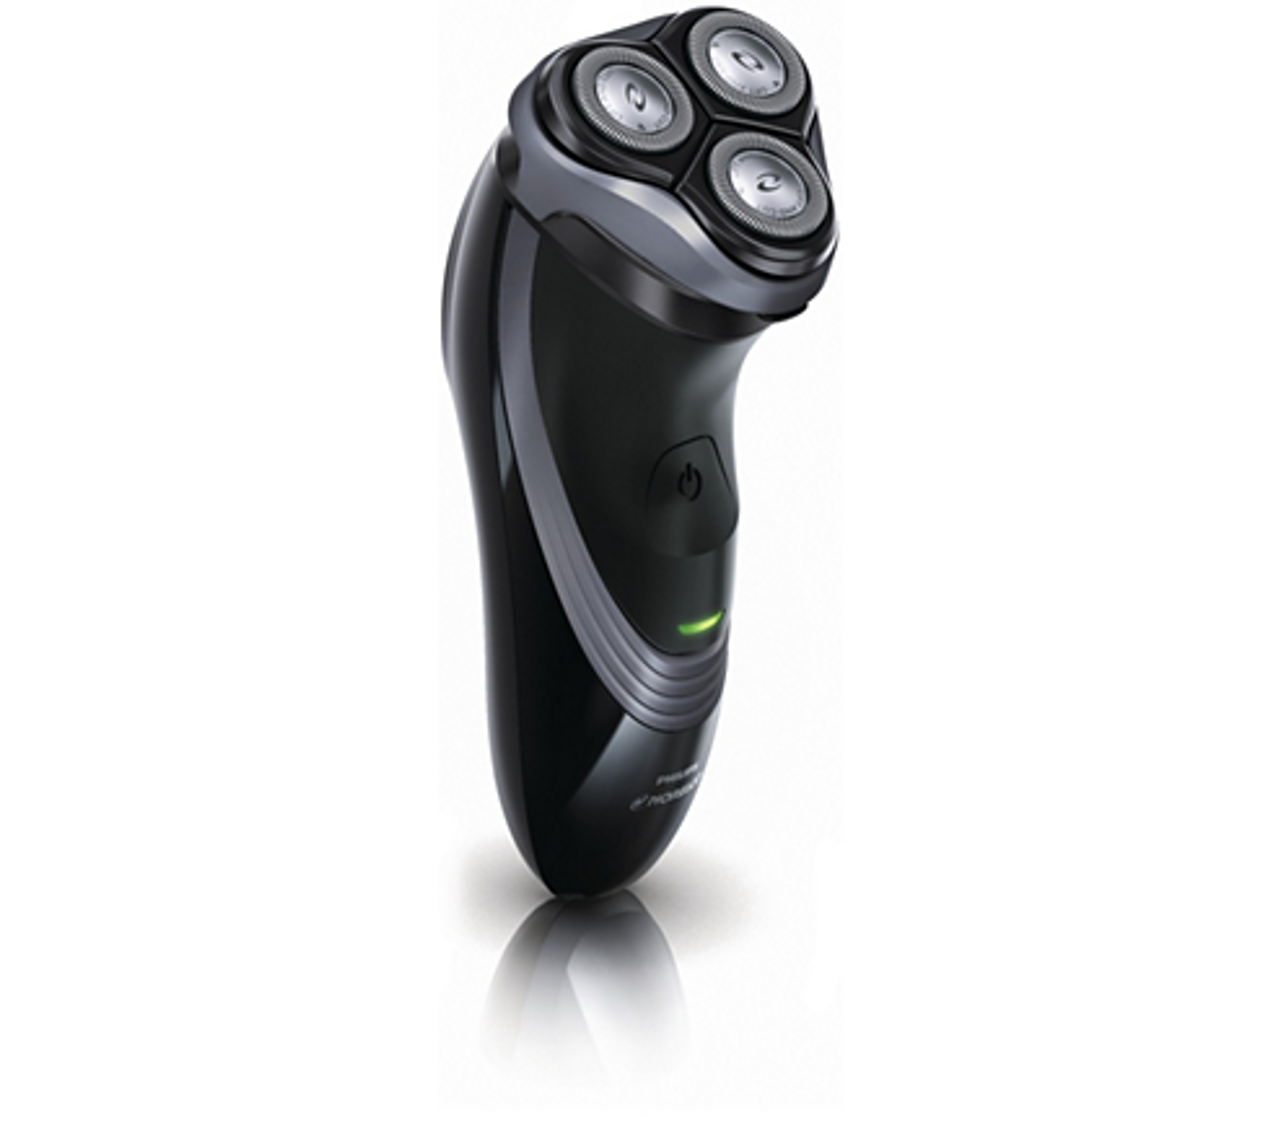 Philips Norelco PT725 PowerTouch Factory Refurbished Cordless Shaver